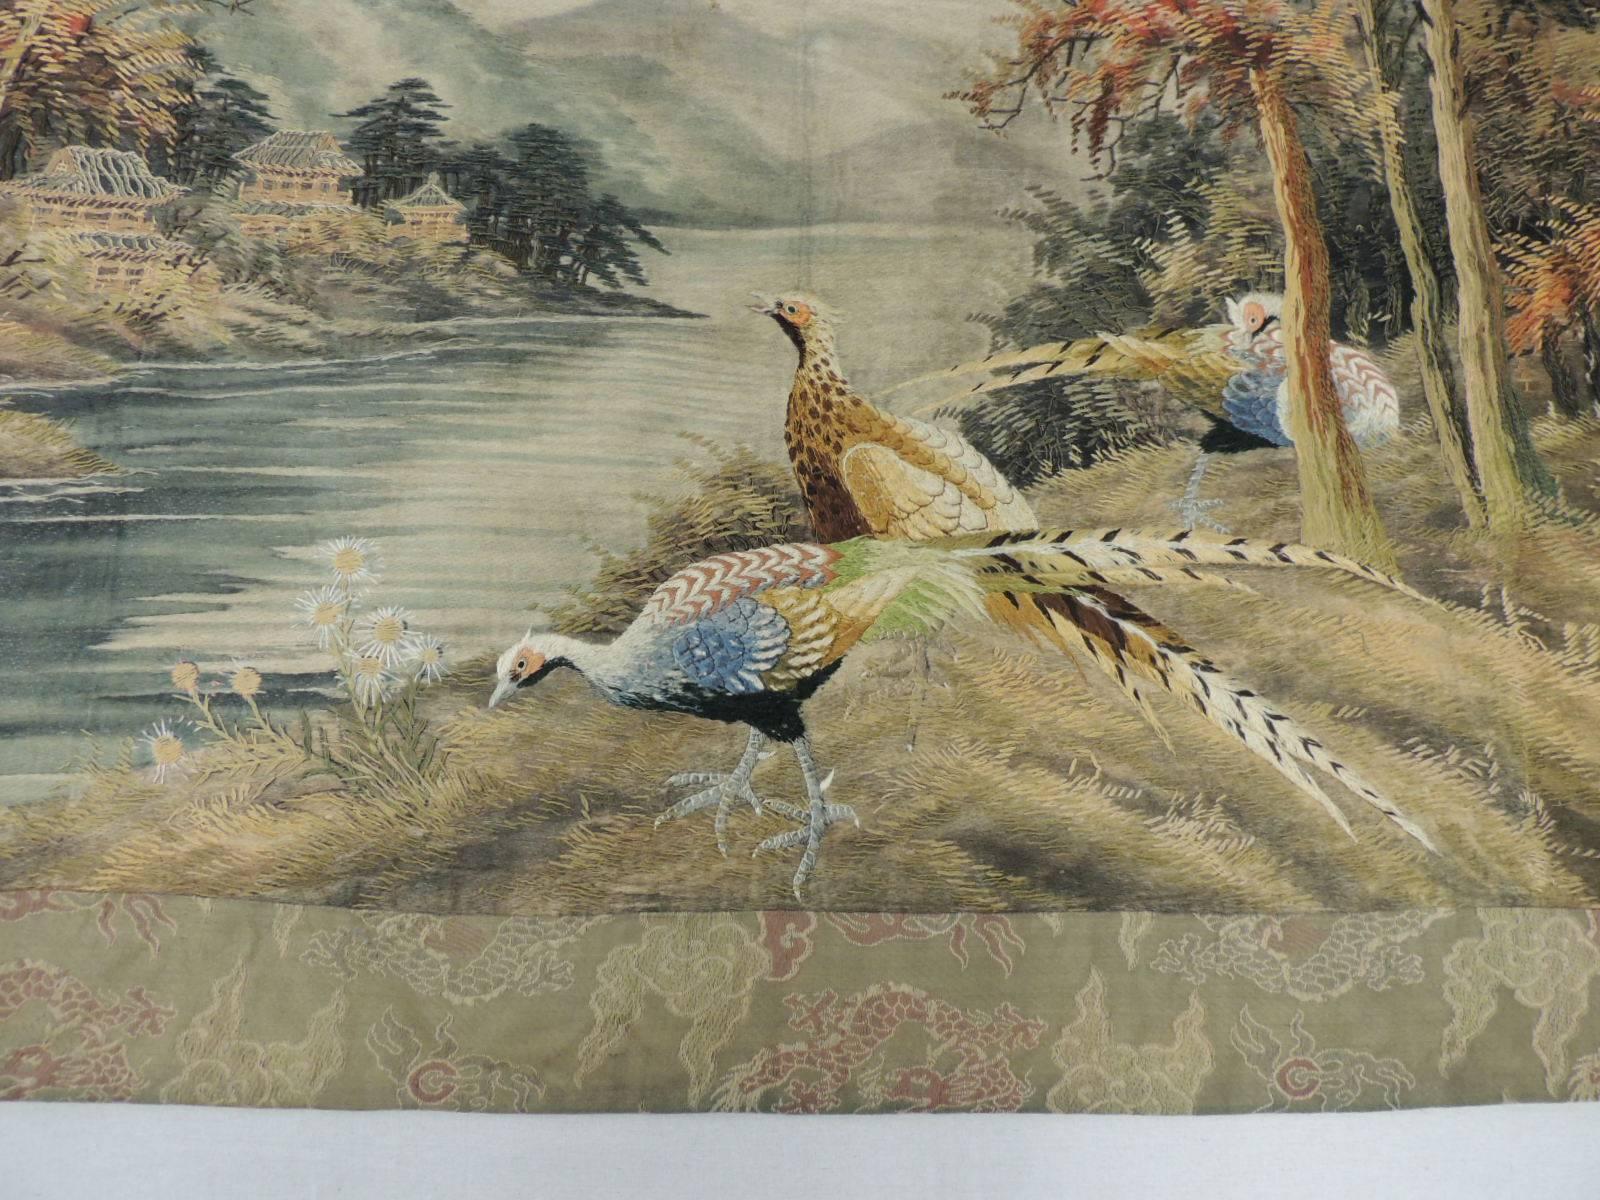 Large Japanese embroidery scenery tapestry depicting pheasants in a winter landscape. Silk Obi 4 inches border all around. Backed with cotton. Ready to hang or display. Meiji period. Signed by artist.
Size: 41 x 65
From: Antique Textiles Galleries

